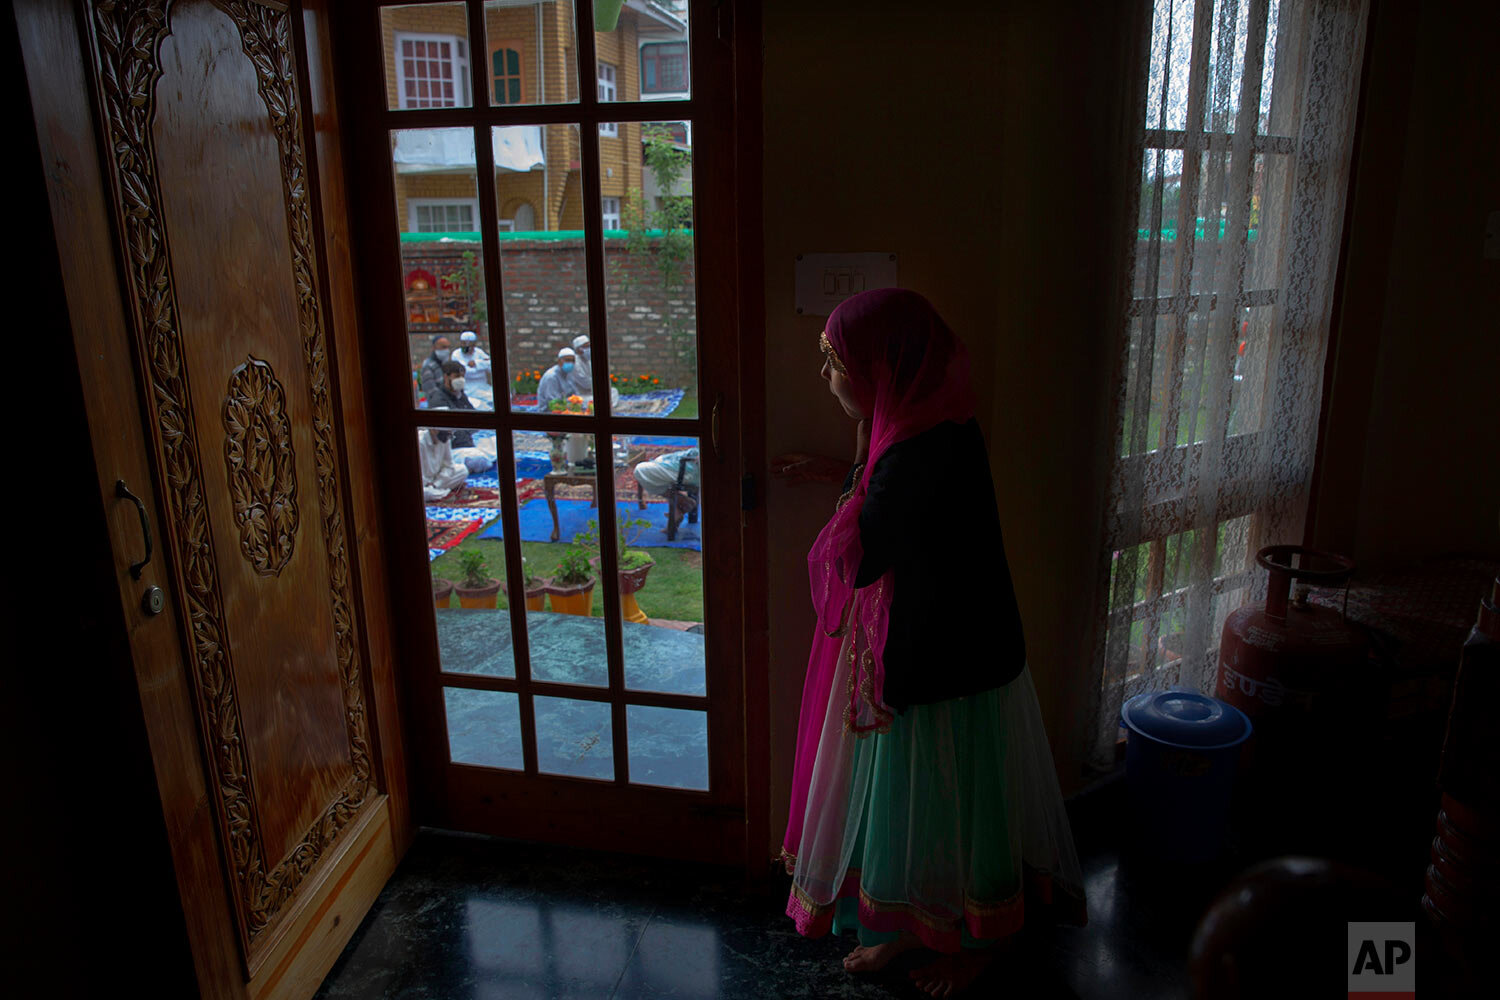  A Kashmiri girl watches from inside her house as men offer Eid prayers in the premises of a residential building in Srinagar, Indian controlled Kashmir, Sunday, May 24, 2020. (AP Photo/Dar Yasin) 